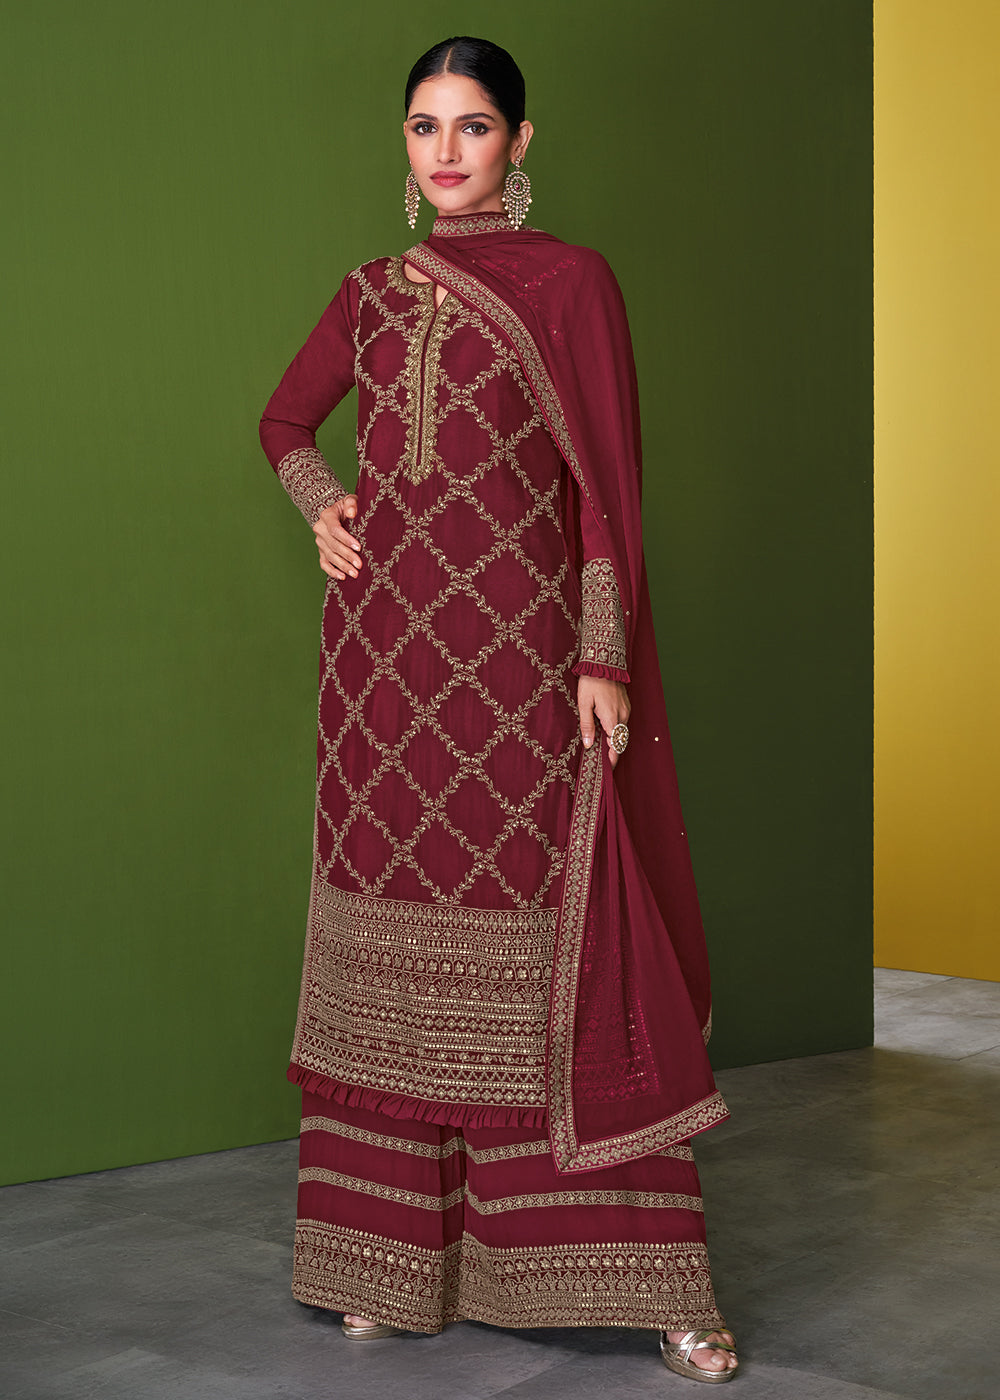 Buy Now Stunning Maroon Beautifully Embroidered Festive Palazzo Salwar Suit Online in USA, UK, Canada, Germany & Worldwide at Empress Clothing.